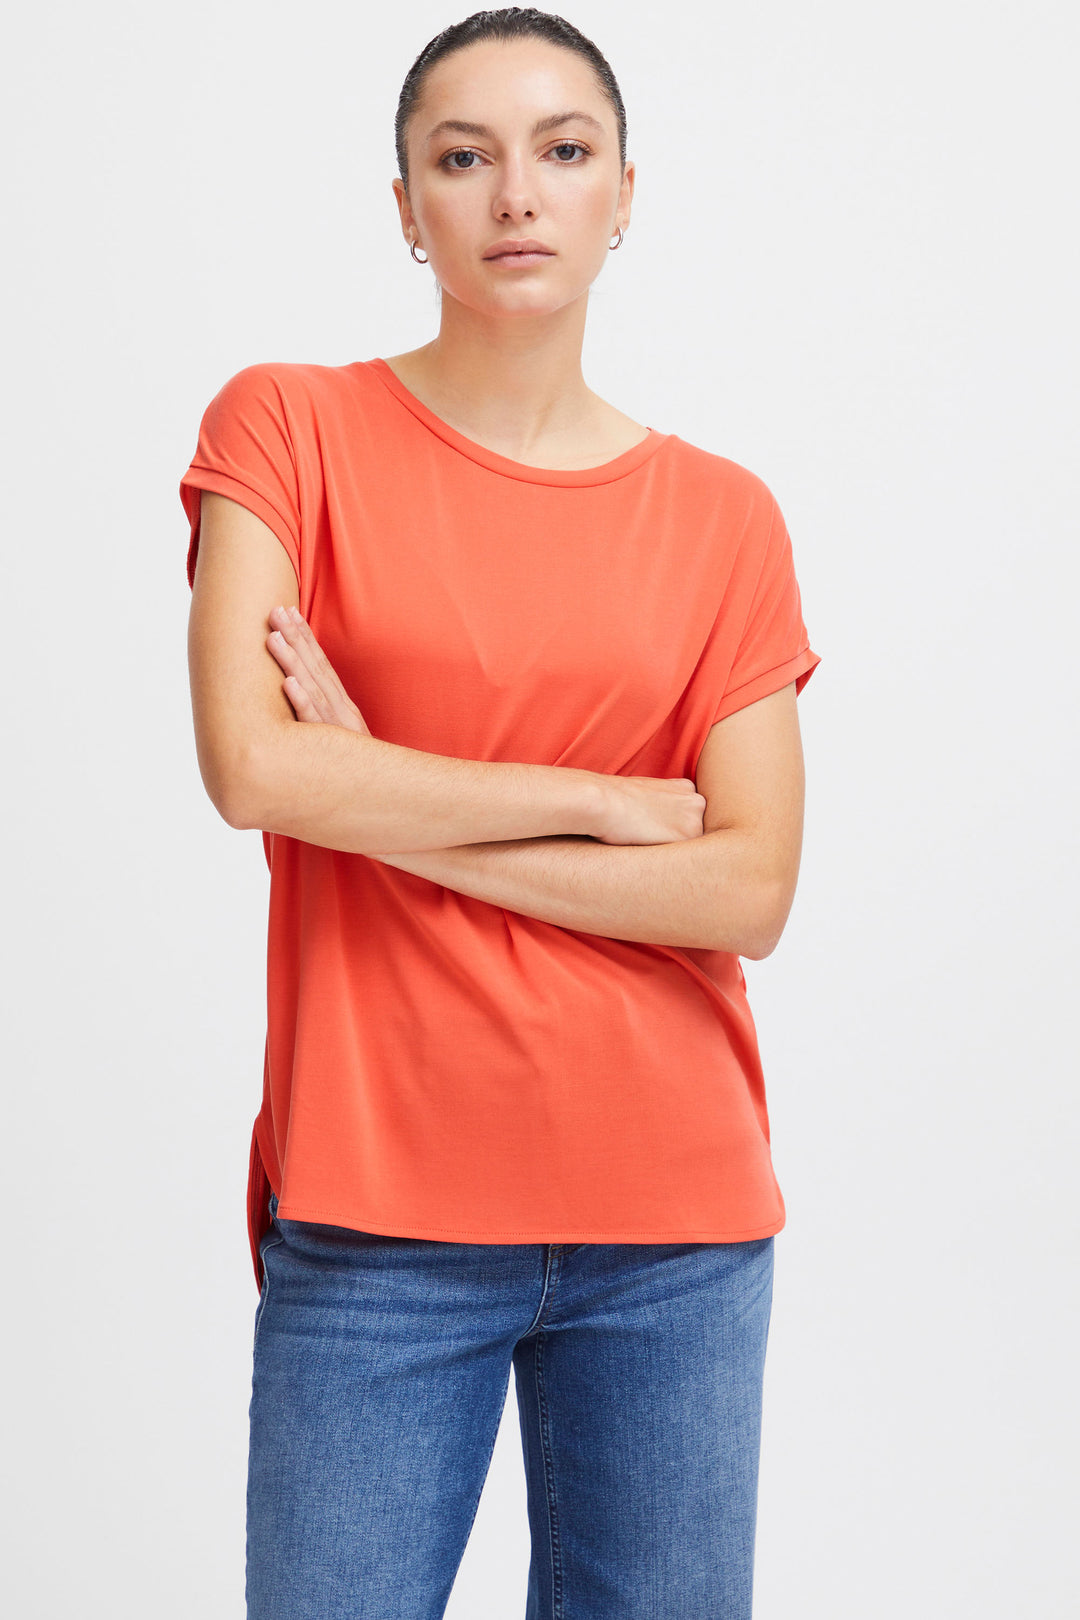 With its cap short sleeves and looser fit, this top offers both style and comfort.